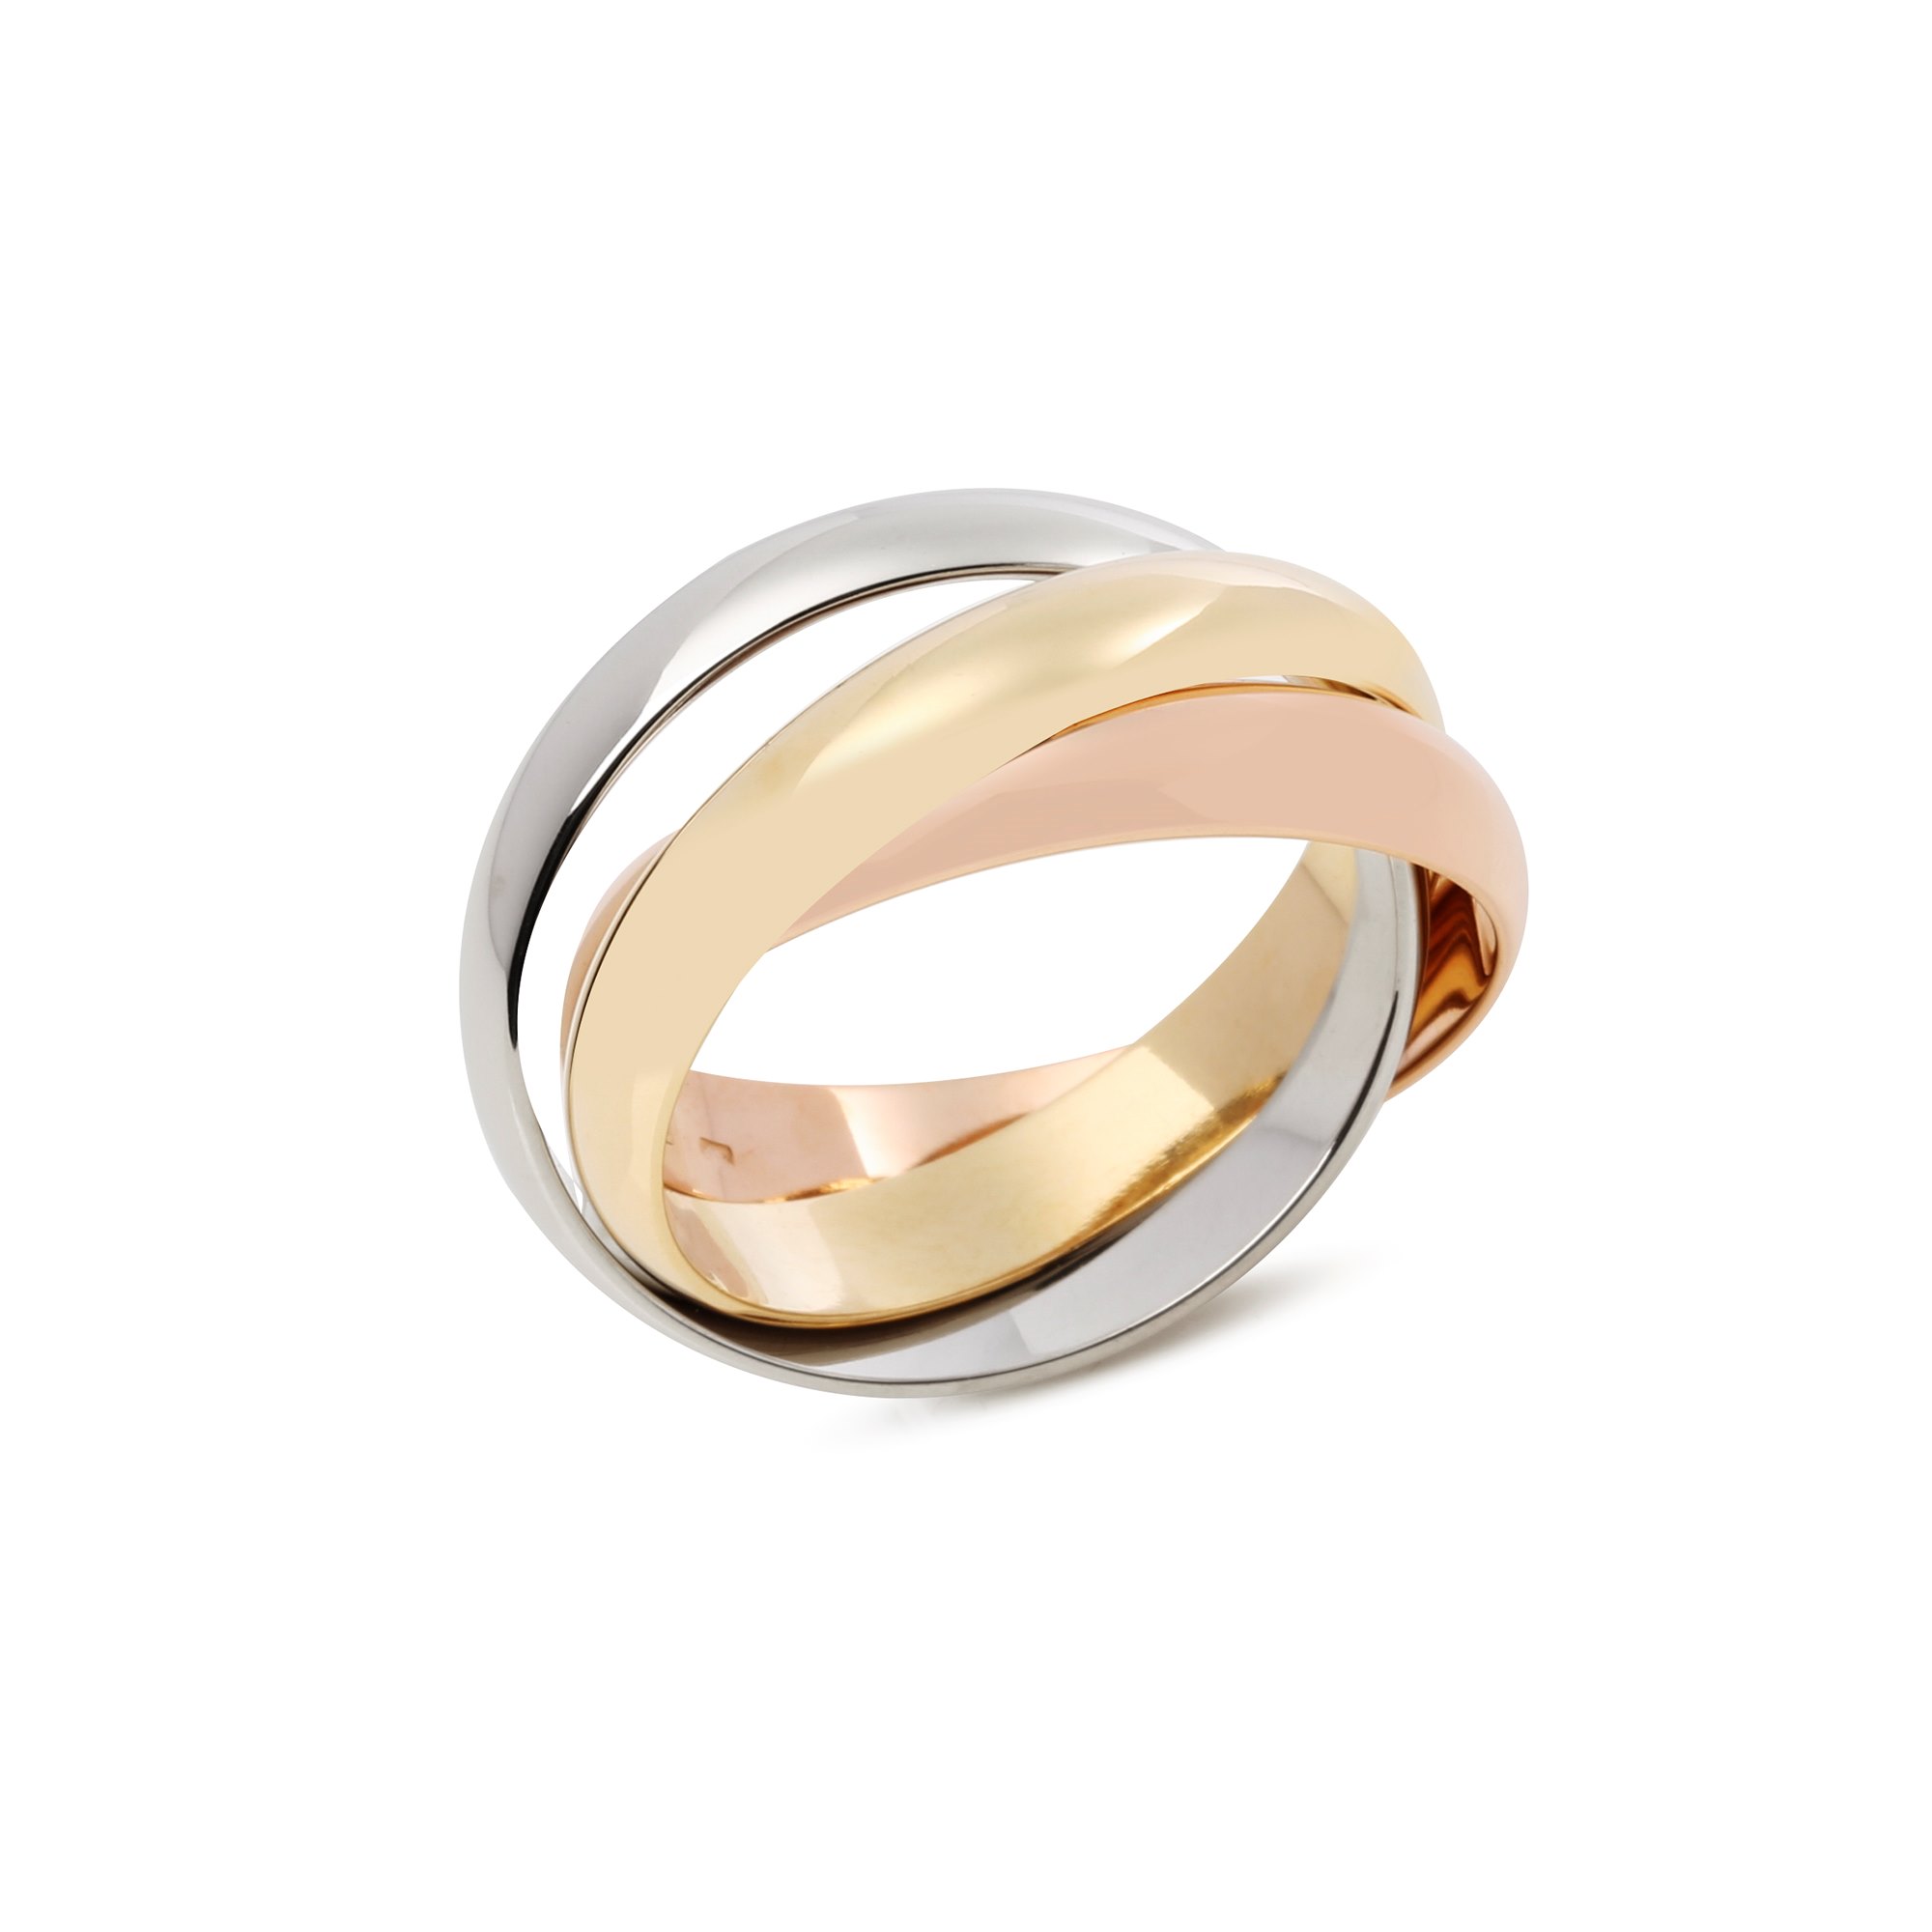 Cartier Classic Trinity Ring